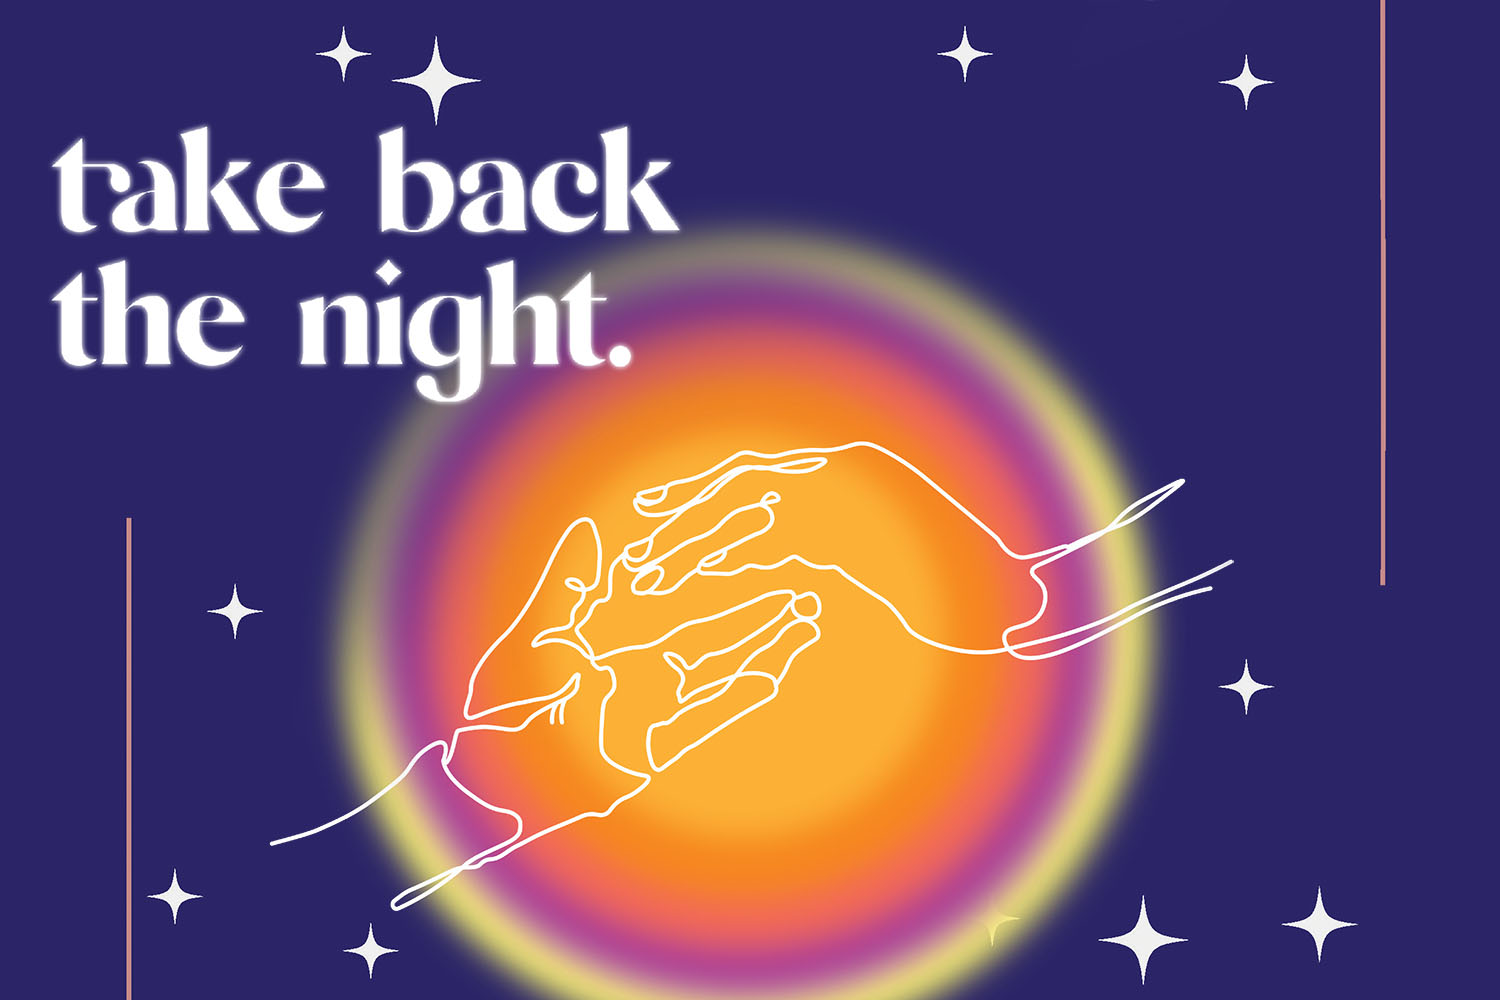 2020 Take Back the Night poster graphic, which shows to hands holding tight in the dark 